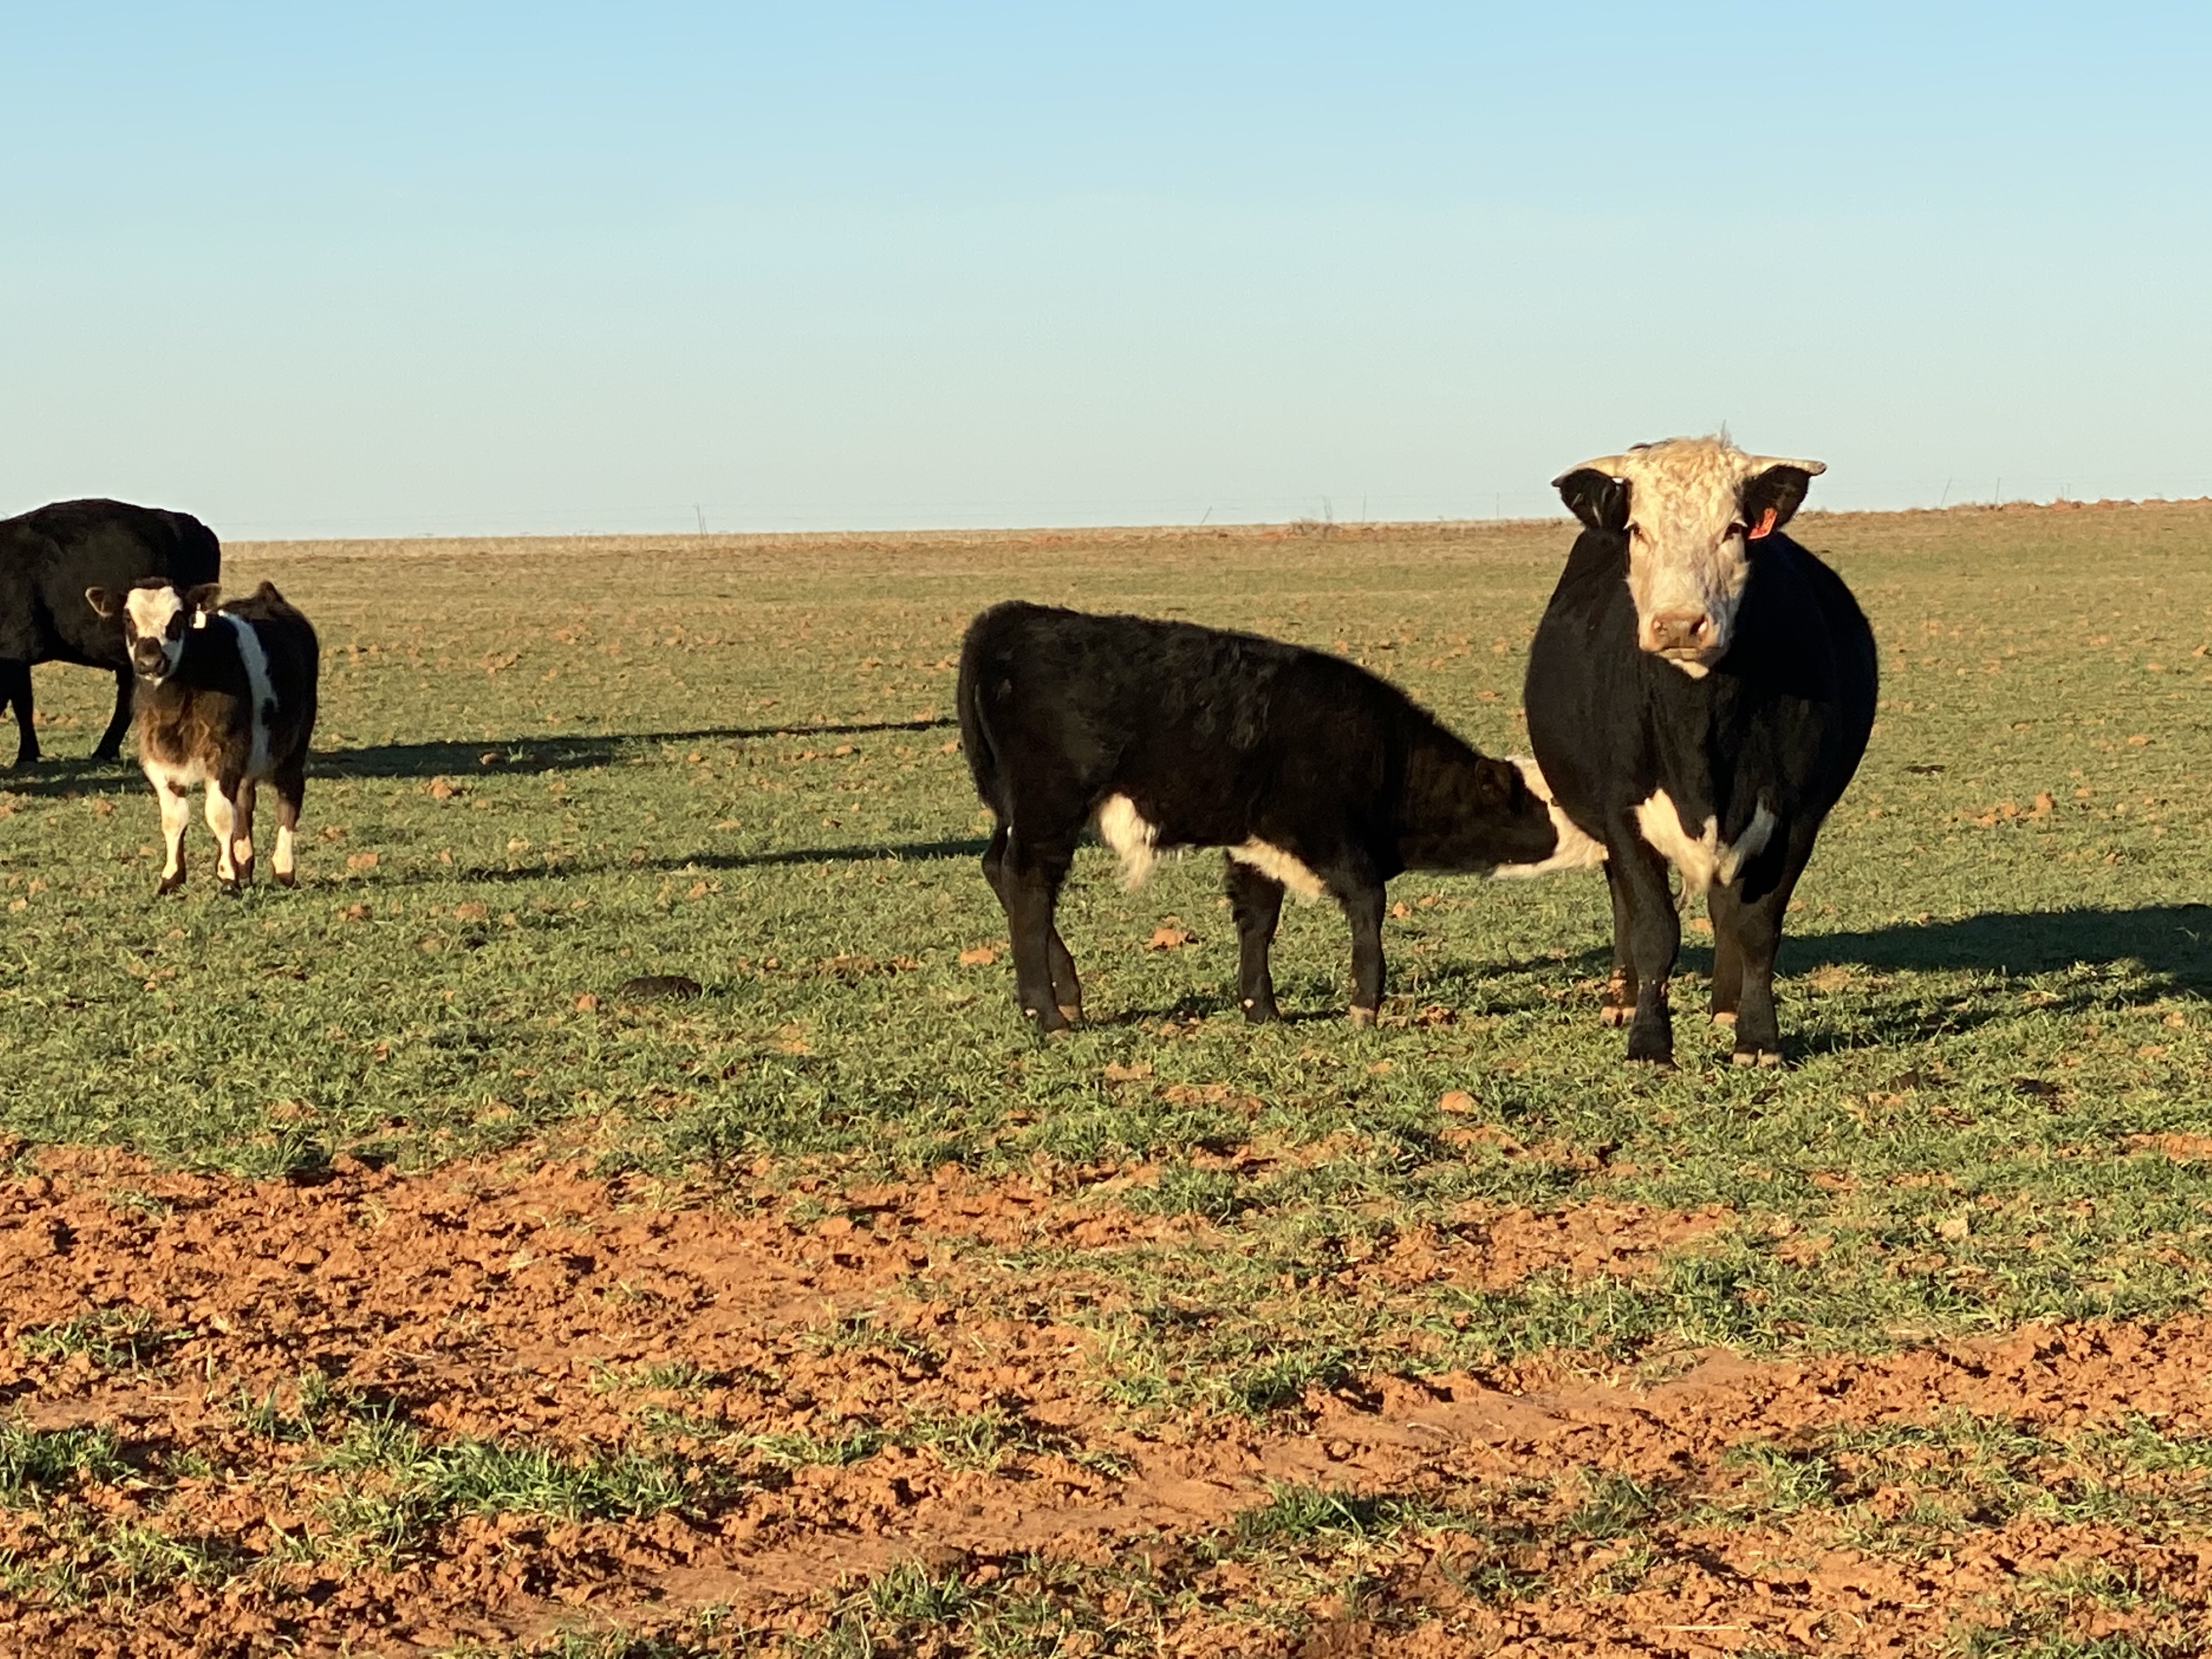 Paul Beck On How To Upgrade Your Cattle's Reputation with Preconditioning